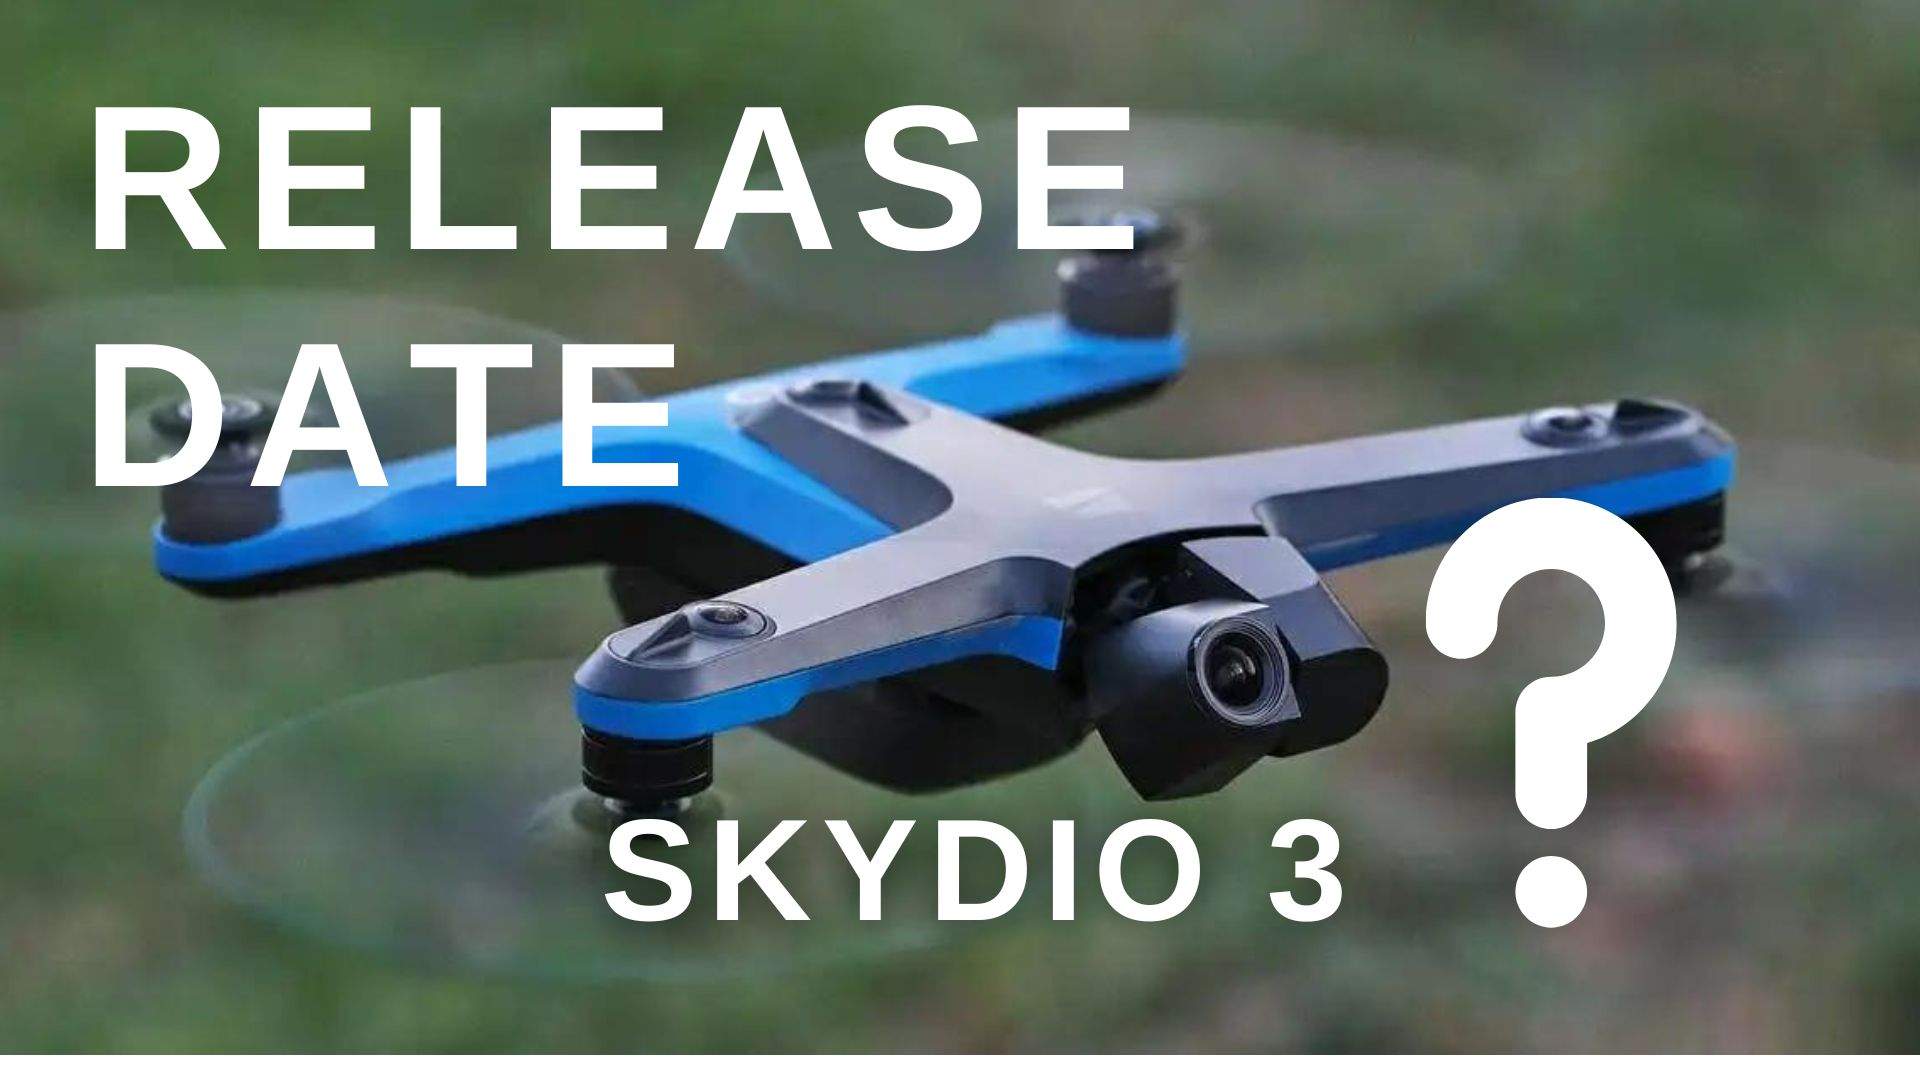 Skydio 2 flying in the air with question for skydio 3